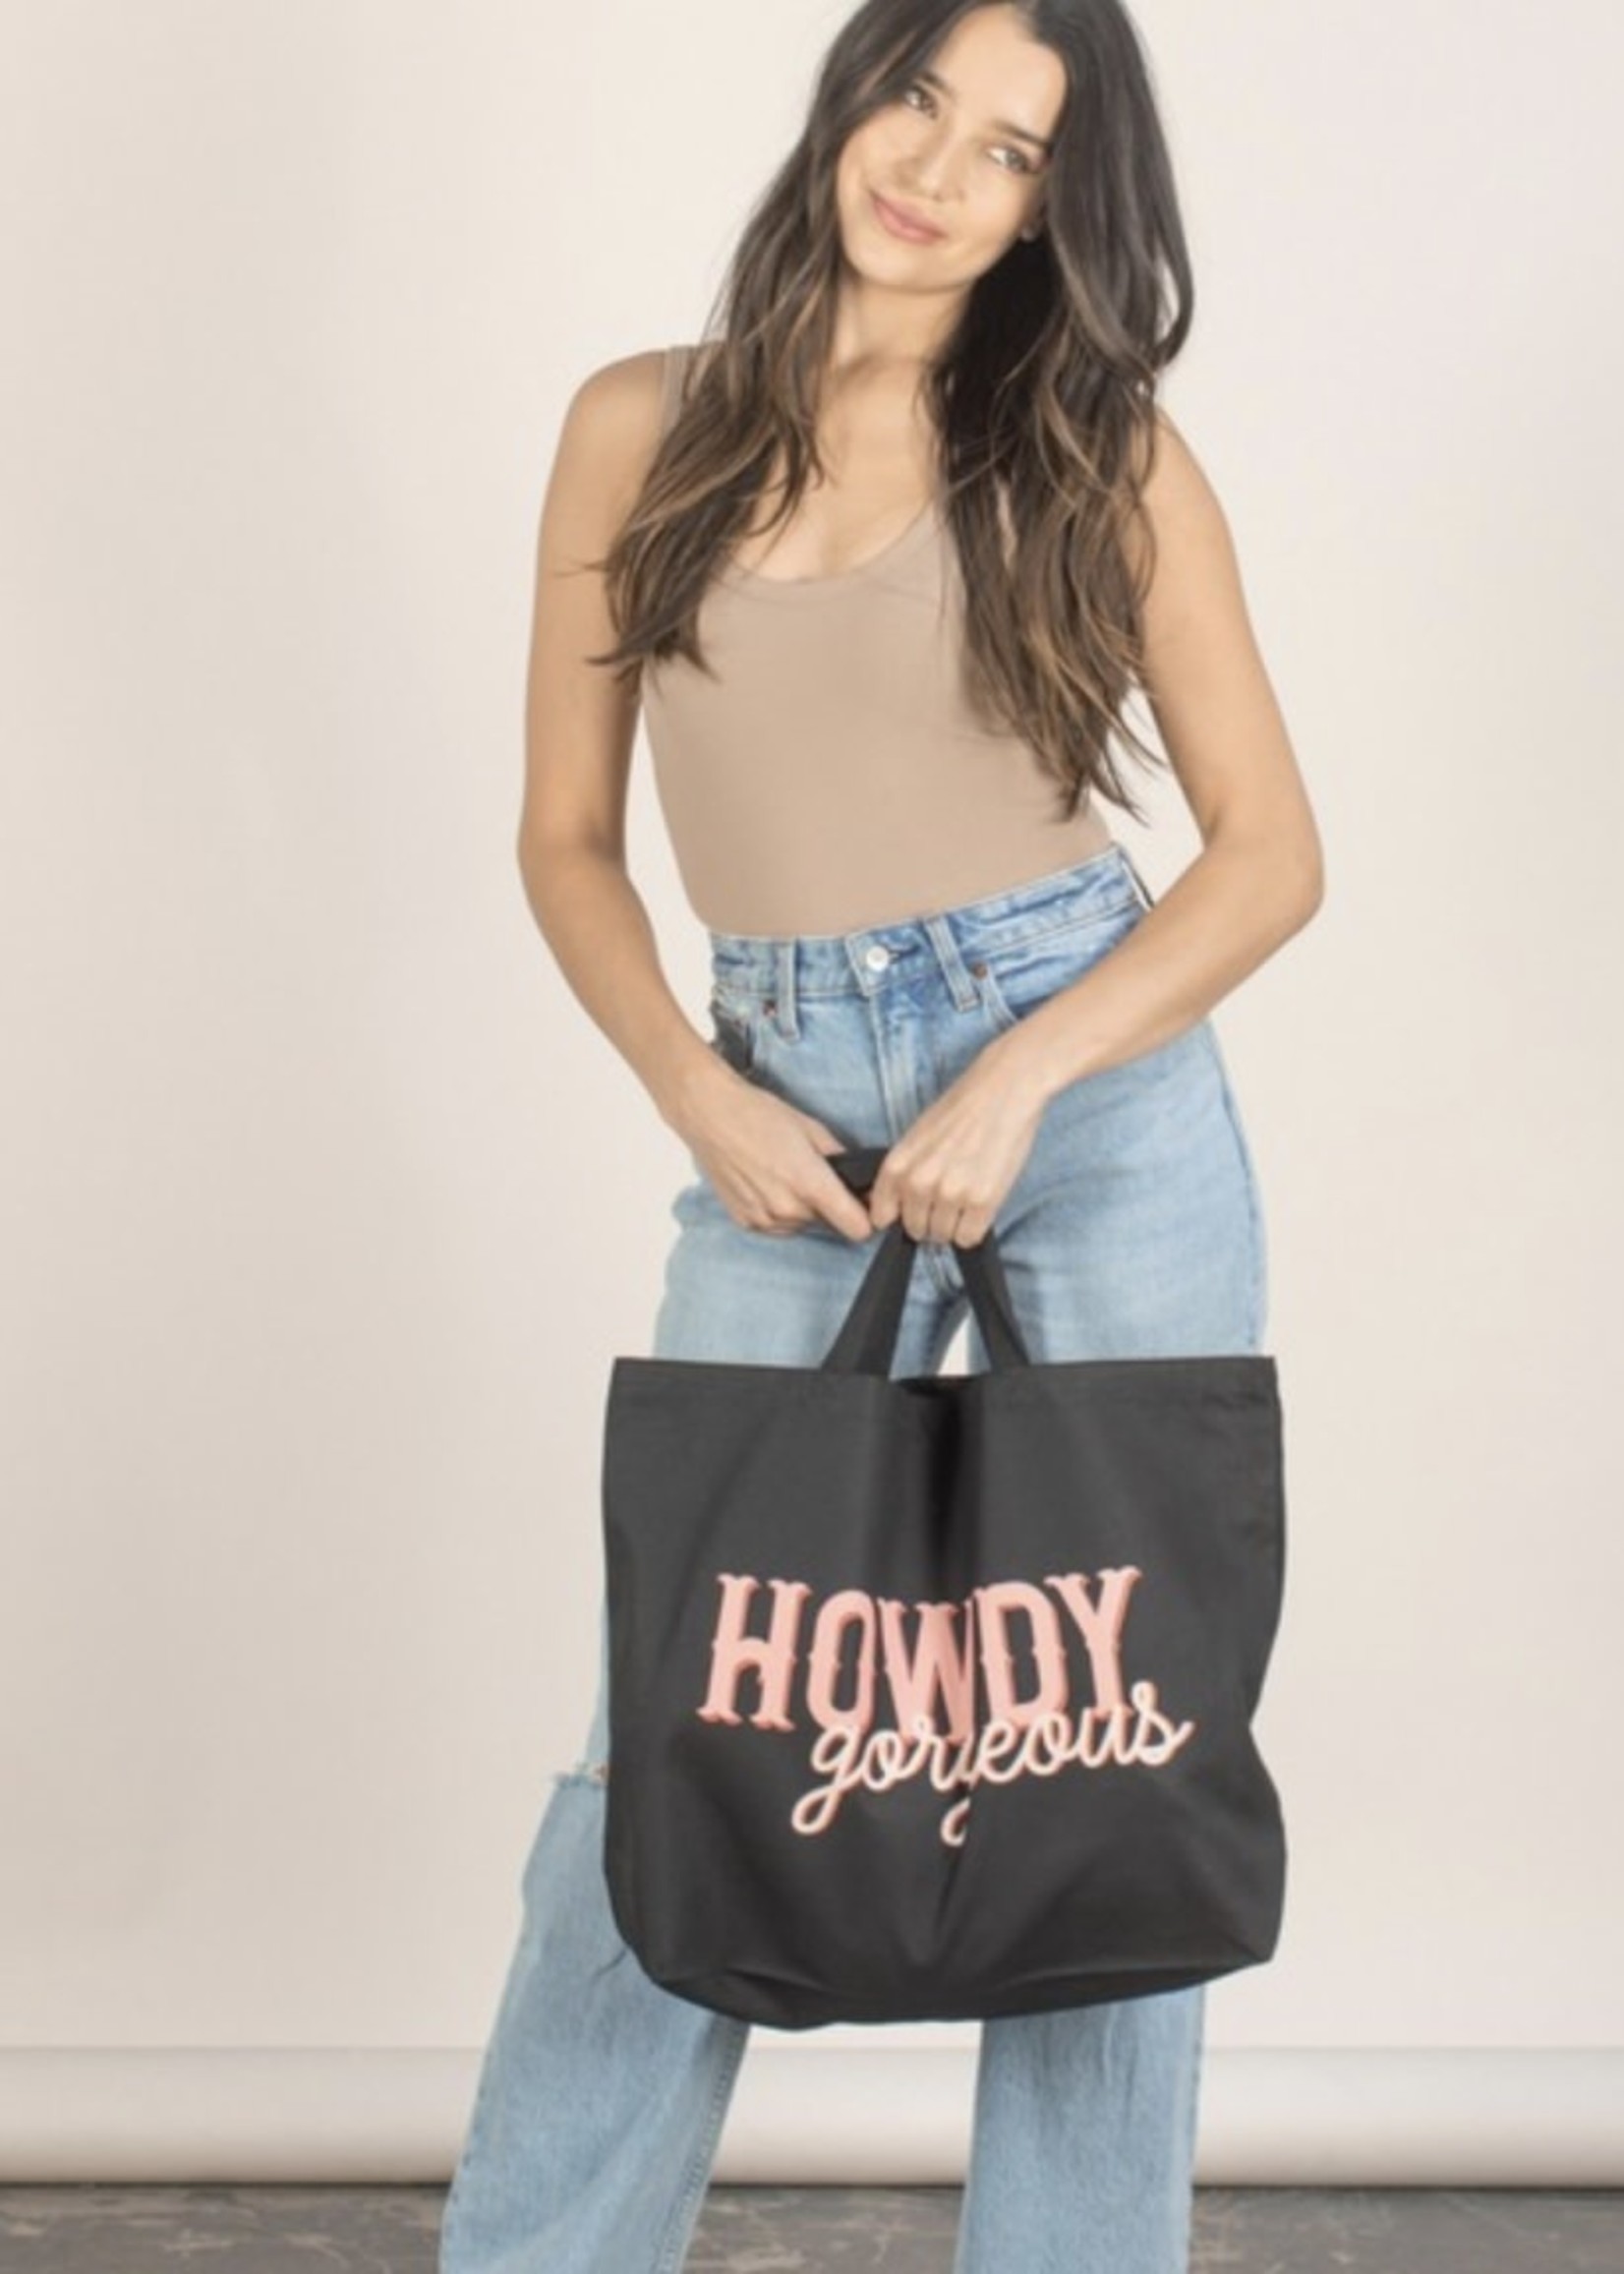 Howdy Tote Bags